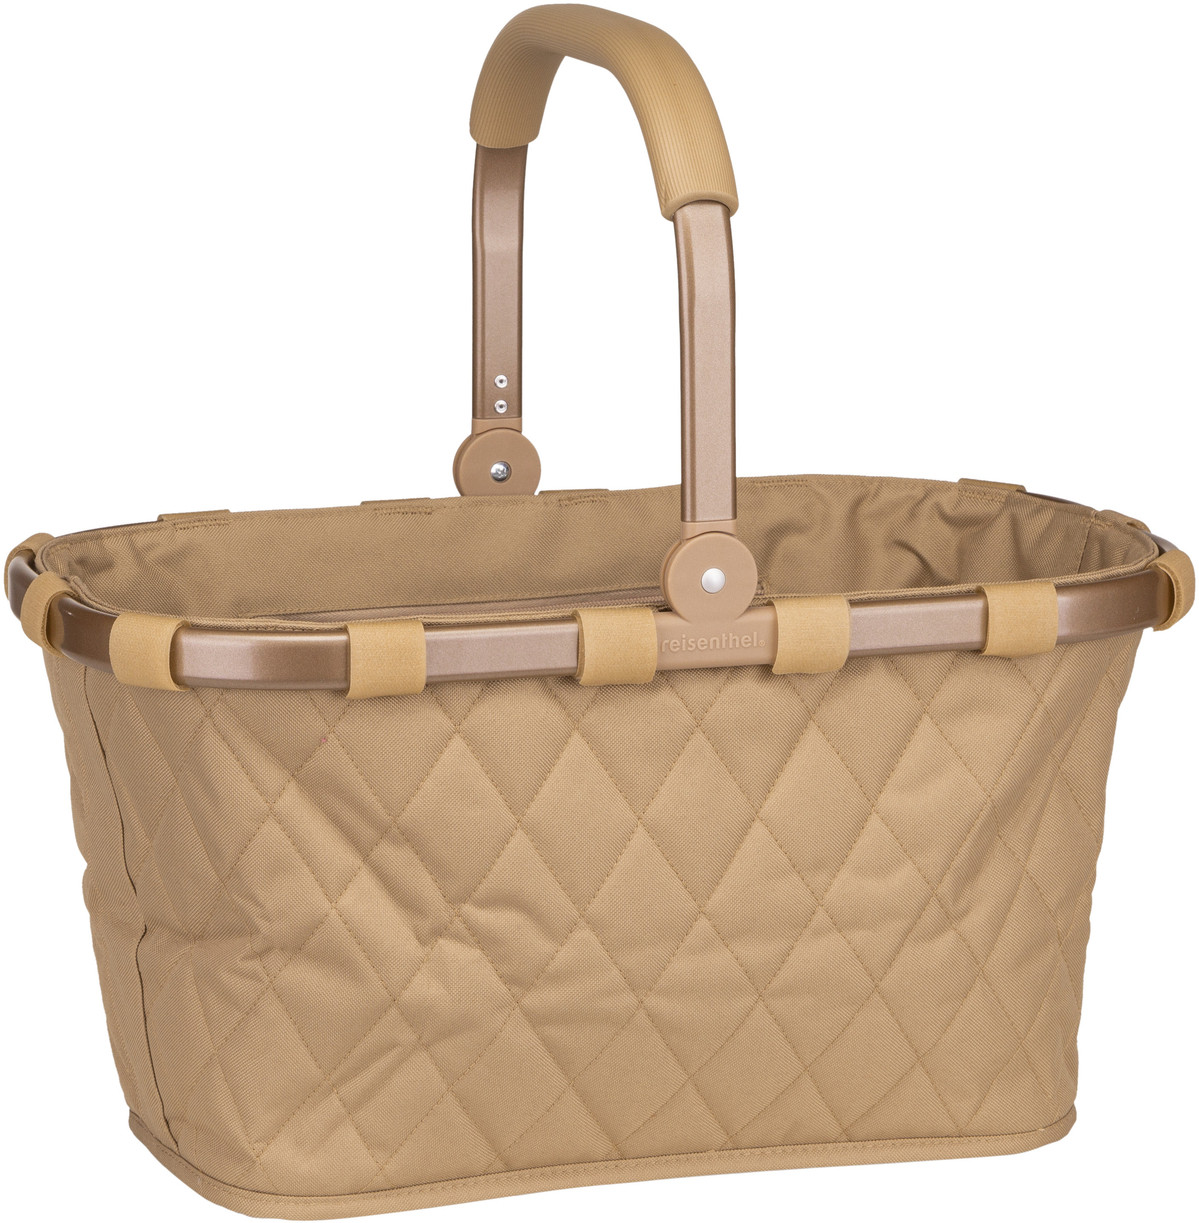 reisenthel carrybag special edition - Rhombus Ginger